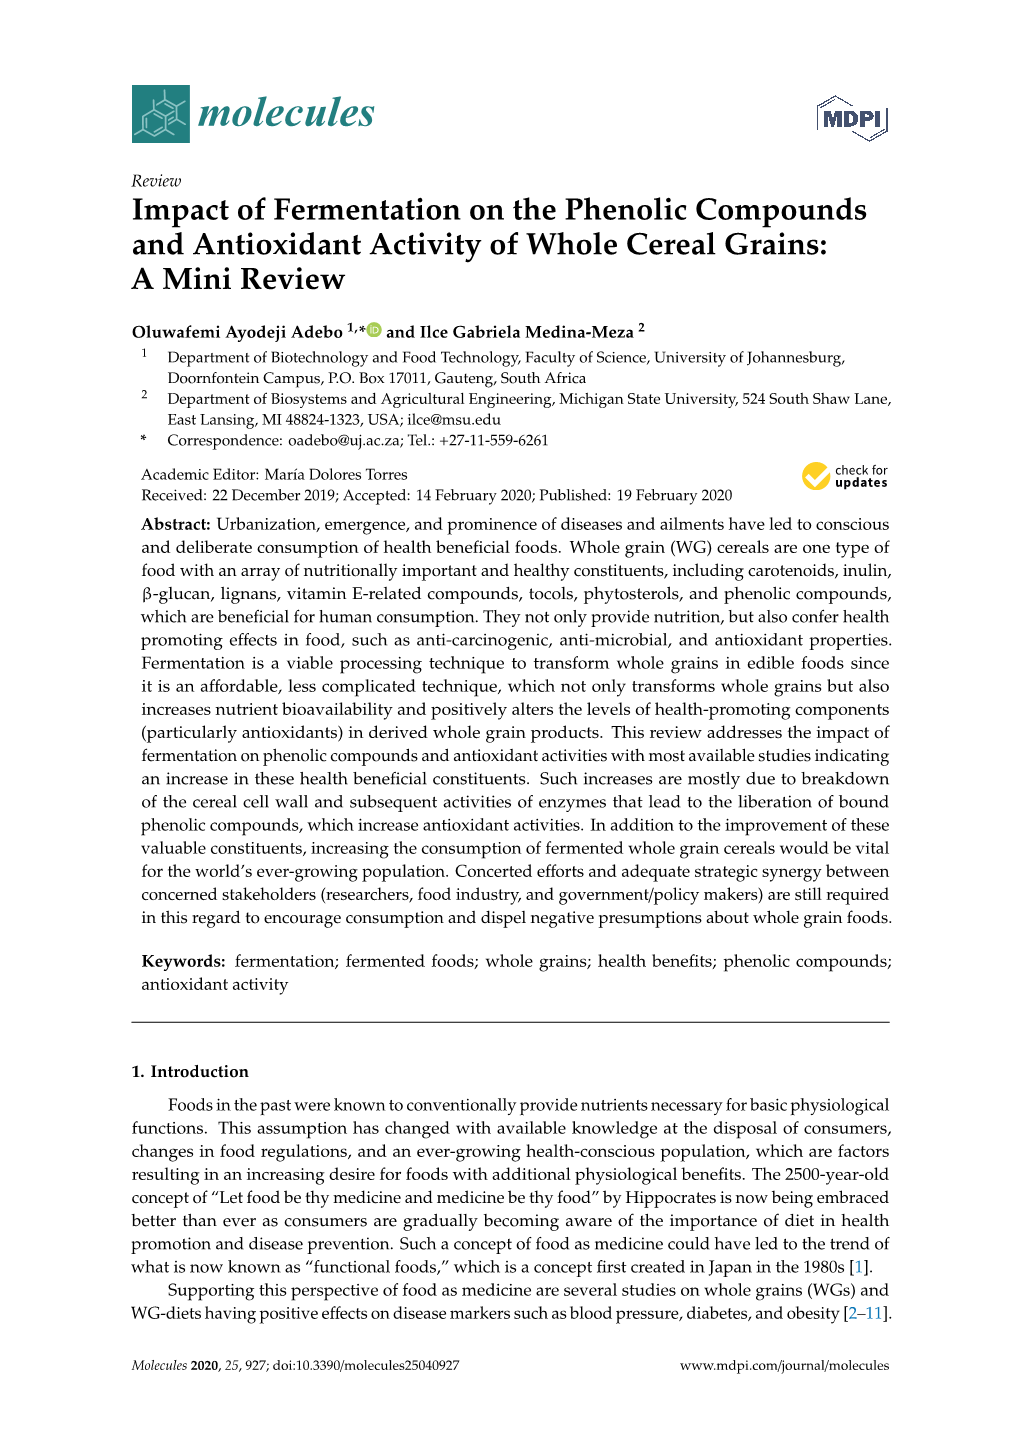 Impact of Fermentation on the Phenolic Compounds and Antioxidant Activity of Whole Cereal Grains: a Mini Review